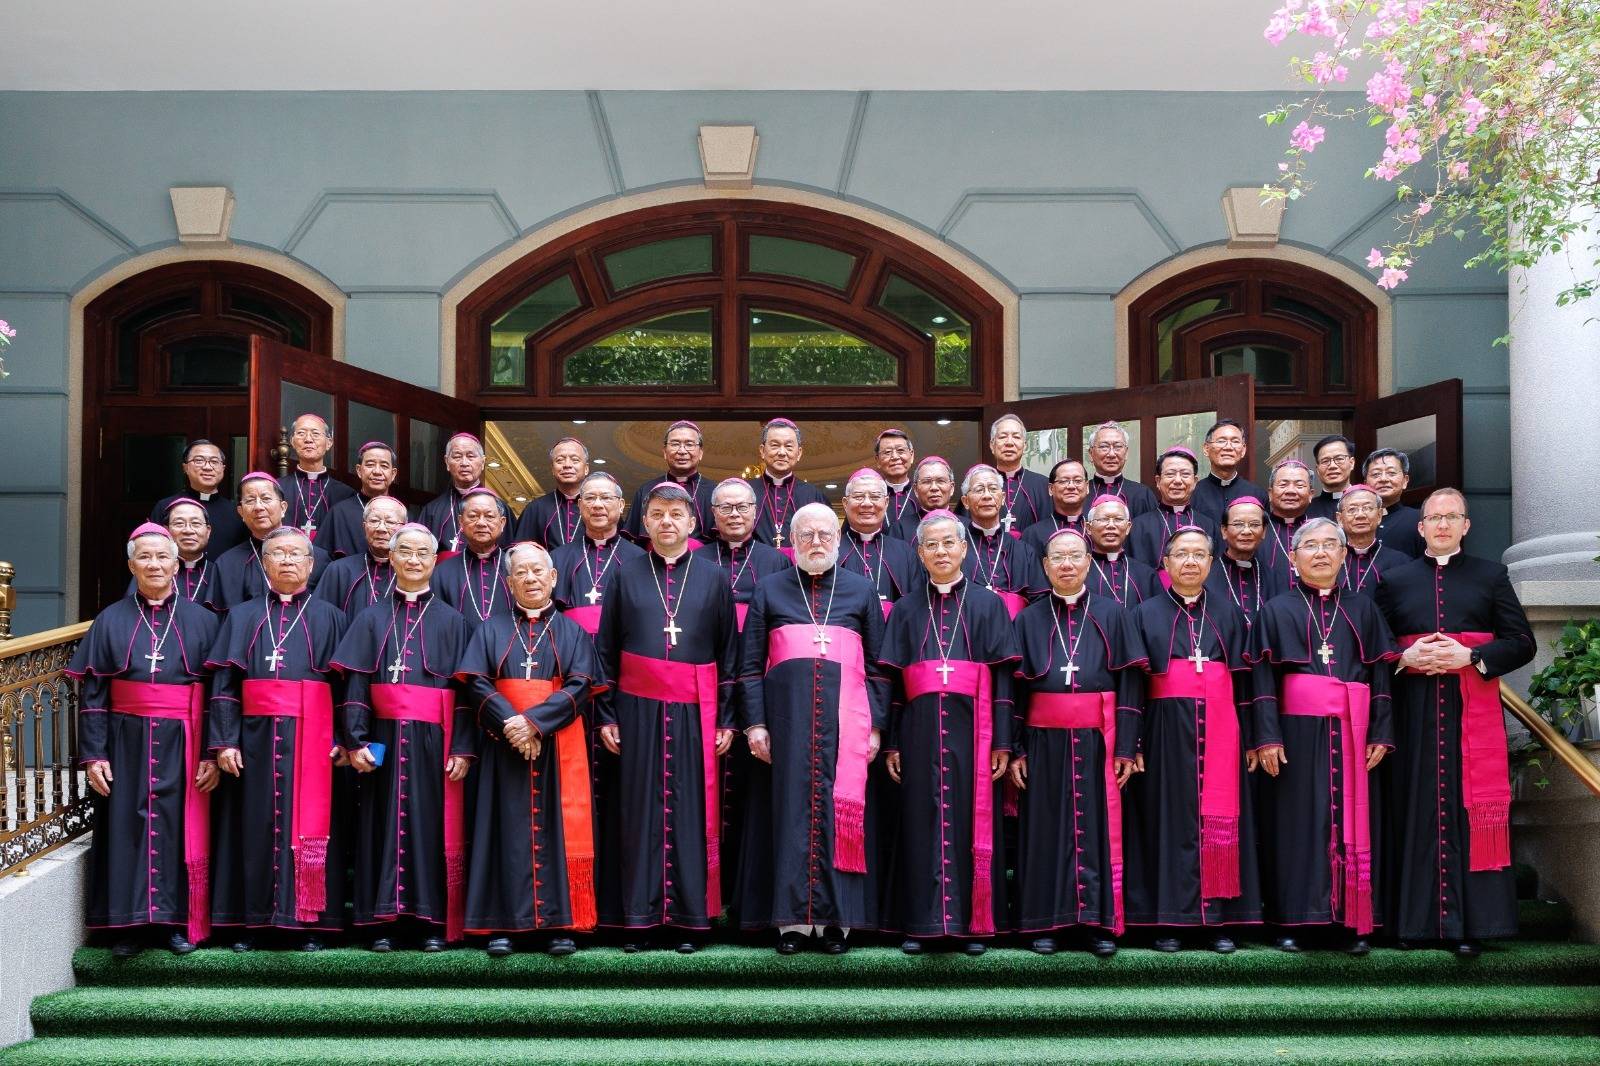 British Archbishop Paul Gallagher, Vatican Secretary for Relations with States (front center), poses for a photo with Vietnamese bishops during his April 9-14 visit to Vietnam. (Credit: Vatican Media.)